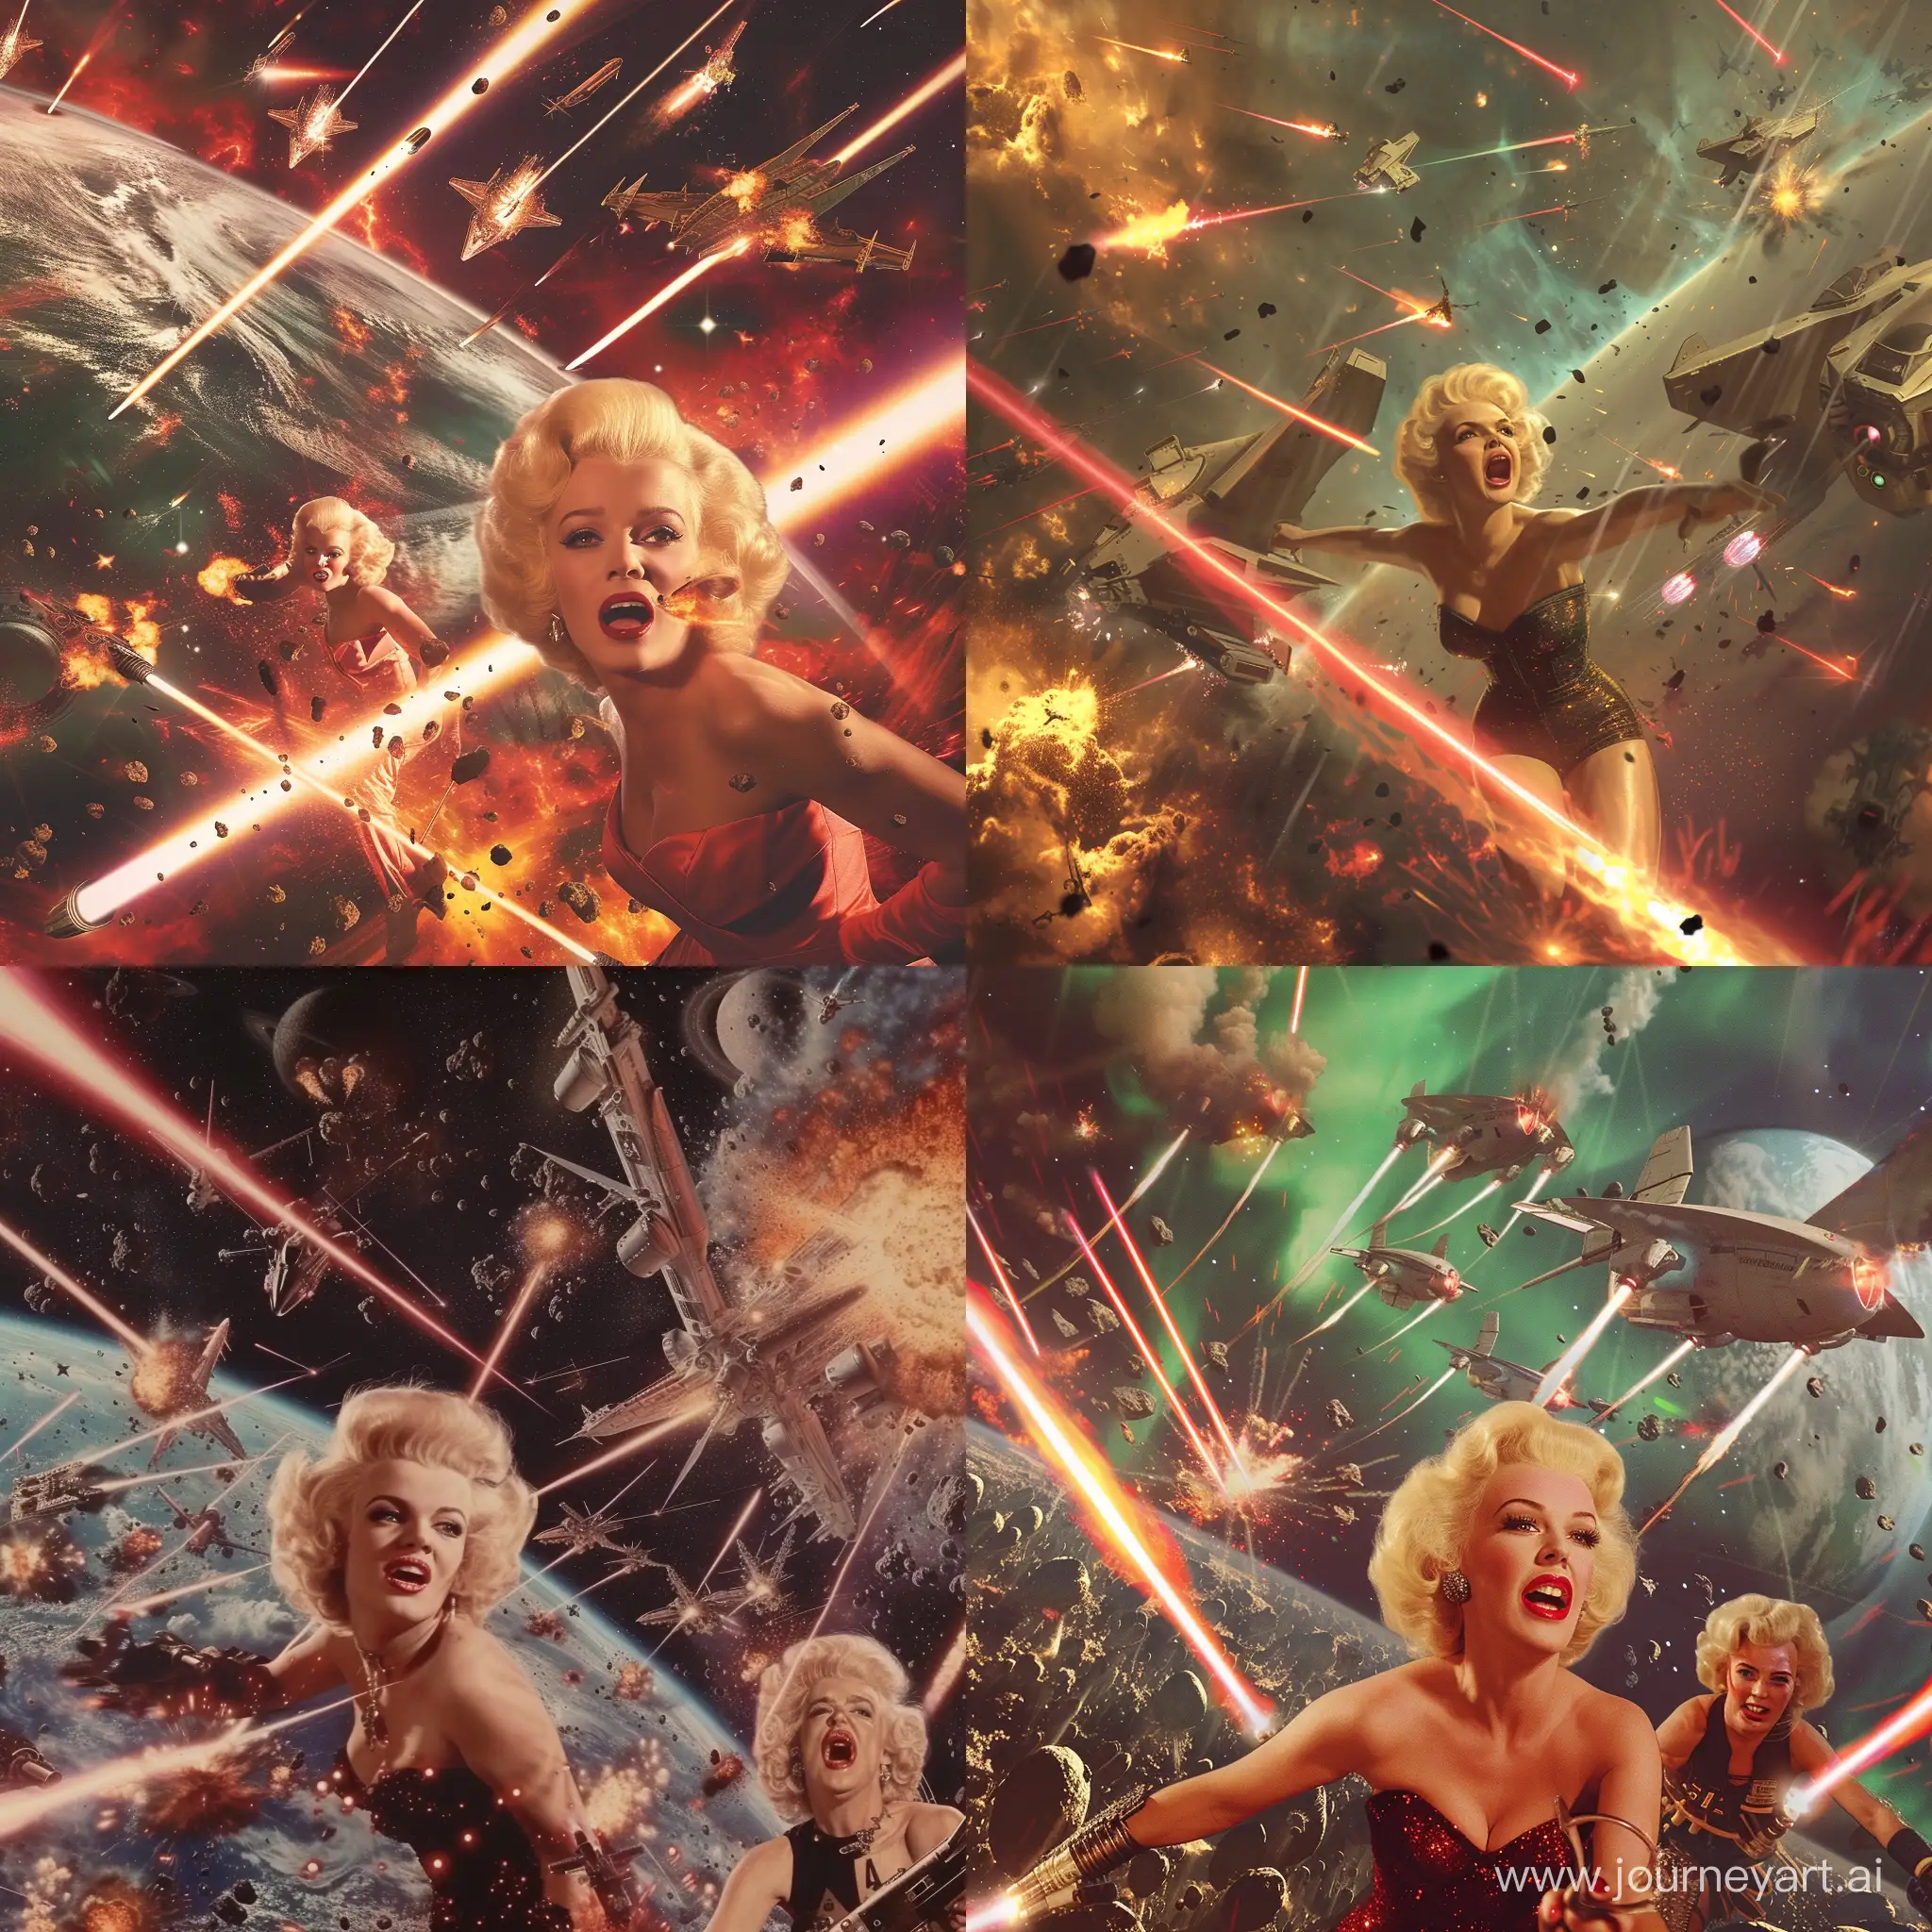  Marilyn Monroe in an epic space battle with many space ships and lasers and explosions with two female space pirates, dramatic